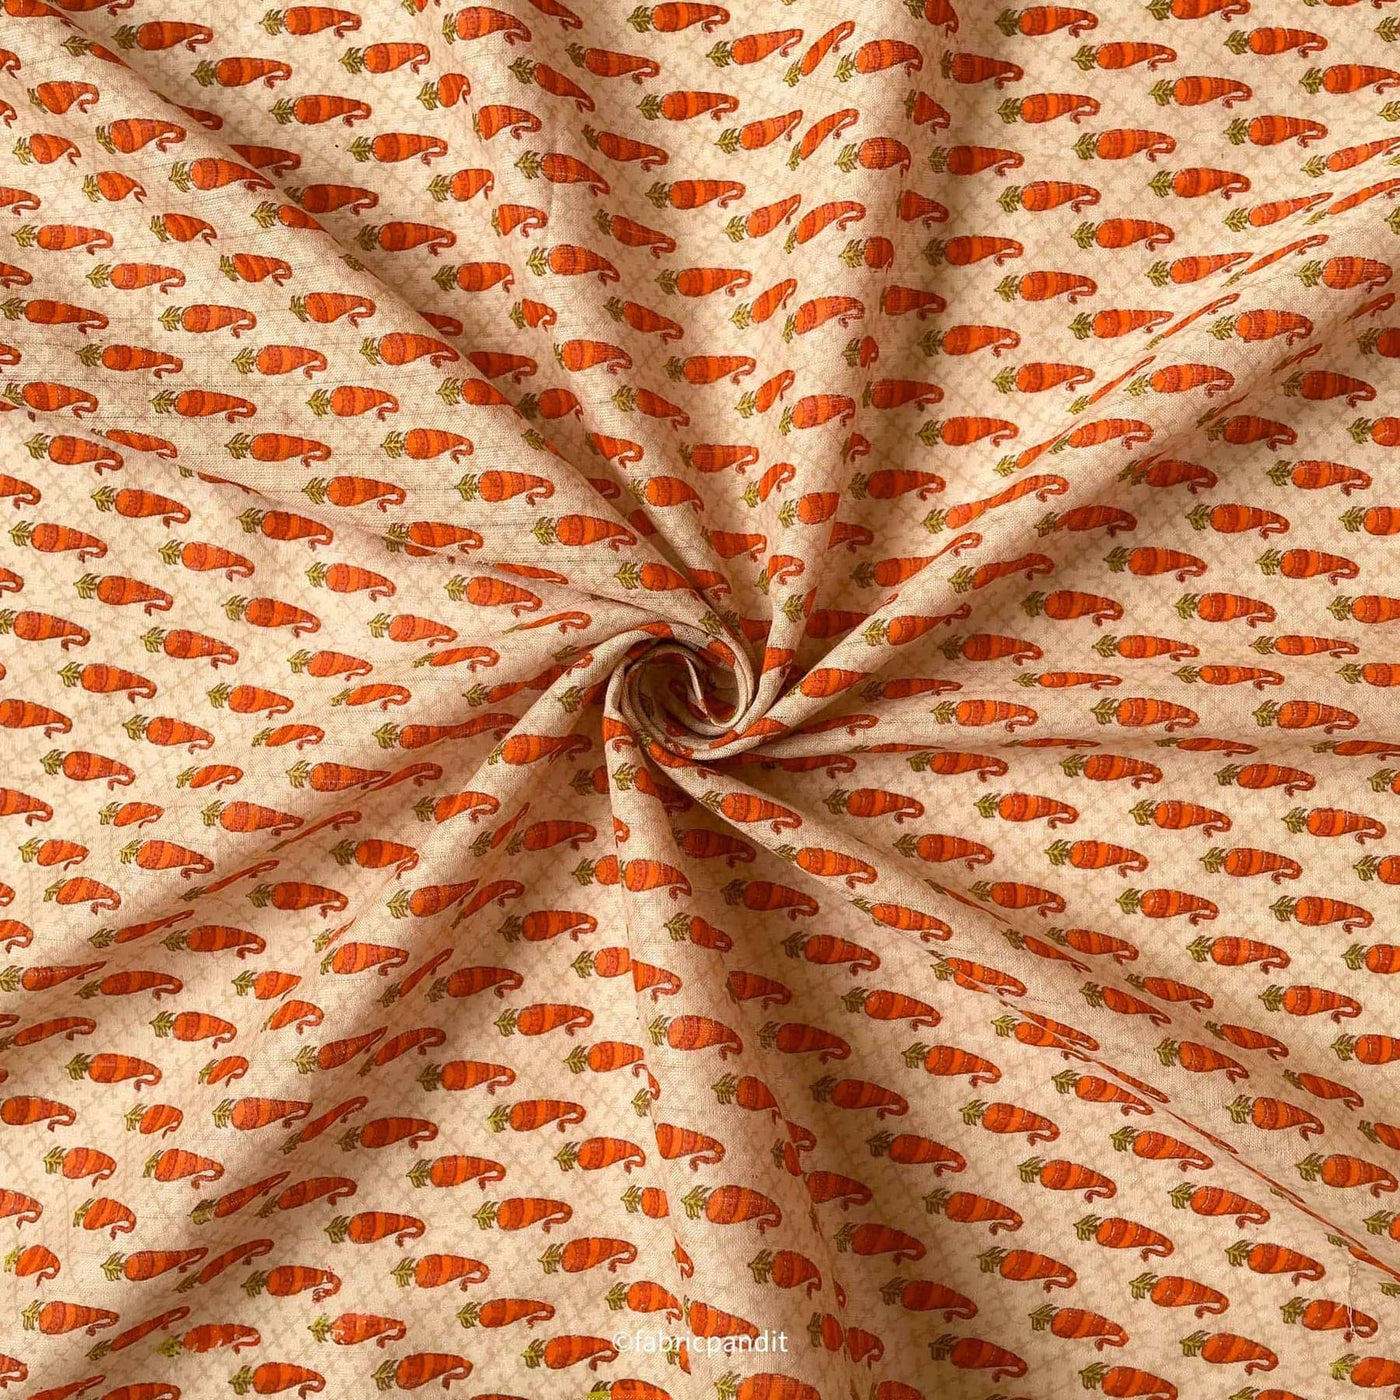 Fabric Pandit Fabric Soft Gold & Orange Abstract Paisely Hand Block Printed Pure Cotton Denting Fabric (Width 43 Inches)